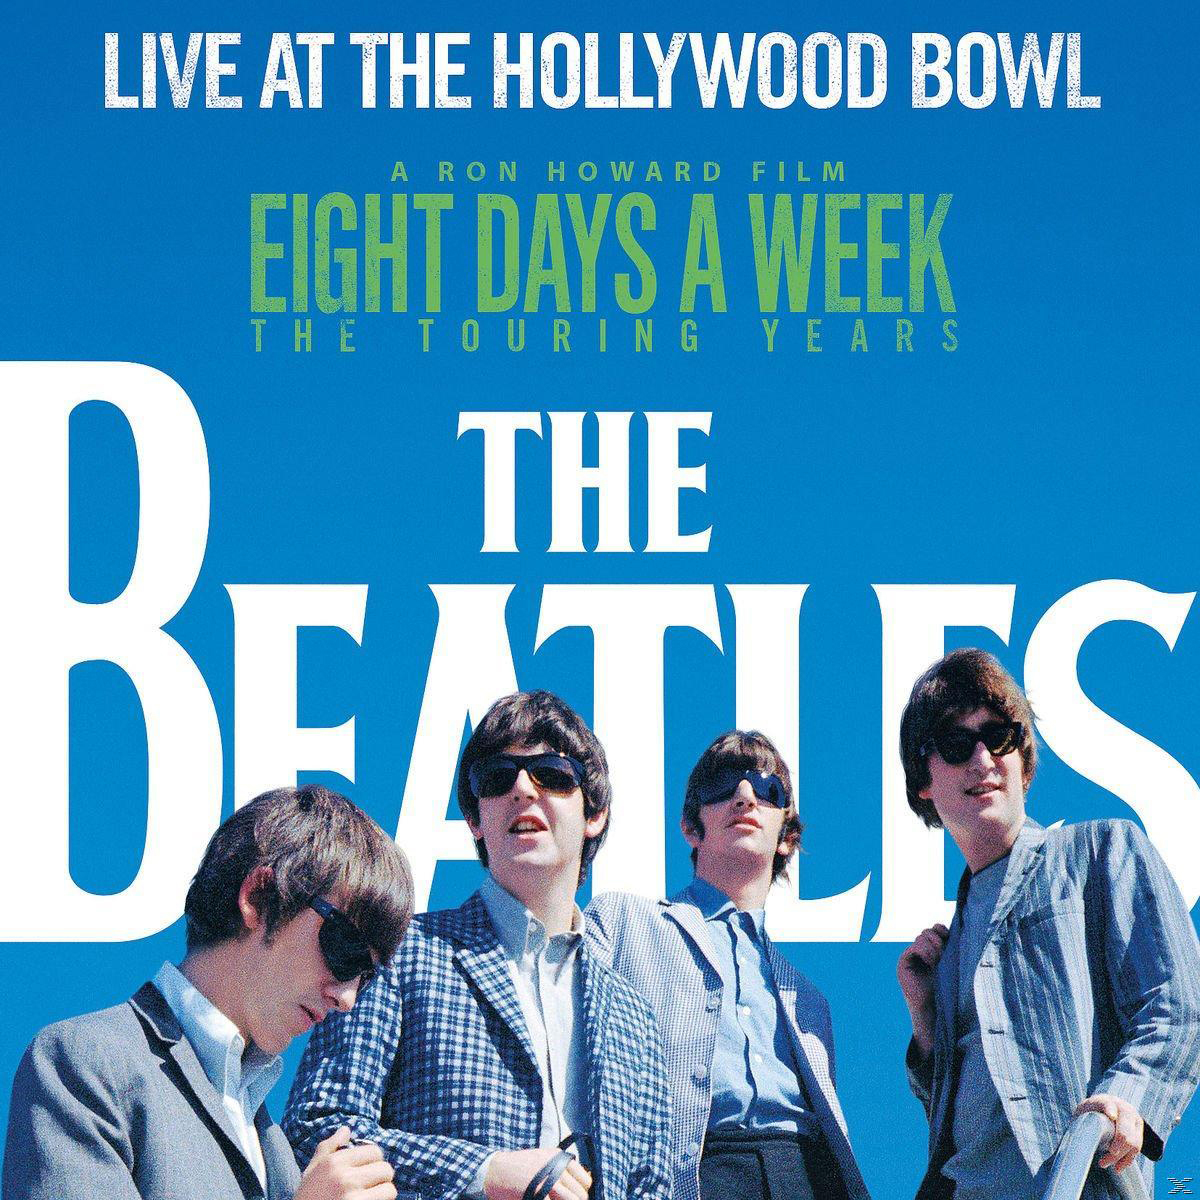 Bowl - The - Live Hollywood The (Vinyl) At Beatles